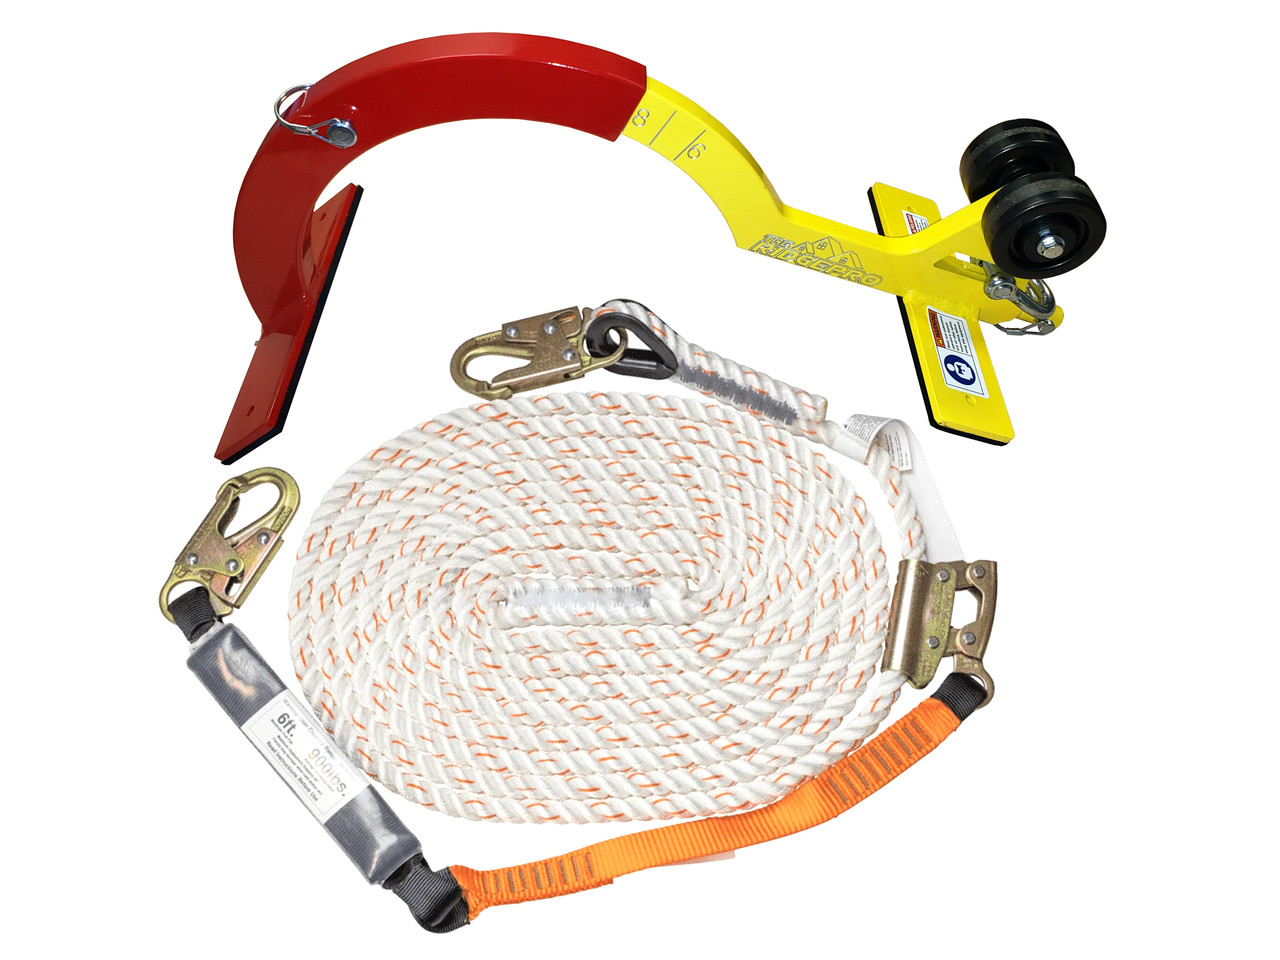 Roof Anchor Kit with Full Body Harness, Lifeline, Lanyard, Rope Grab, Roof  Anchor and Bag - UltraSafeUSA